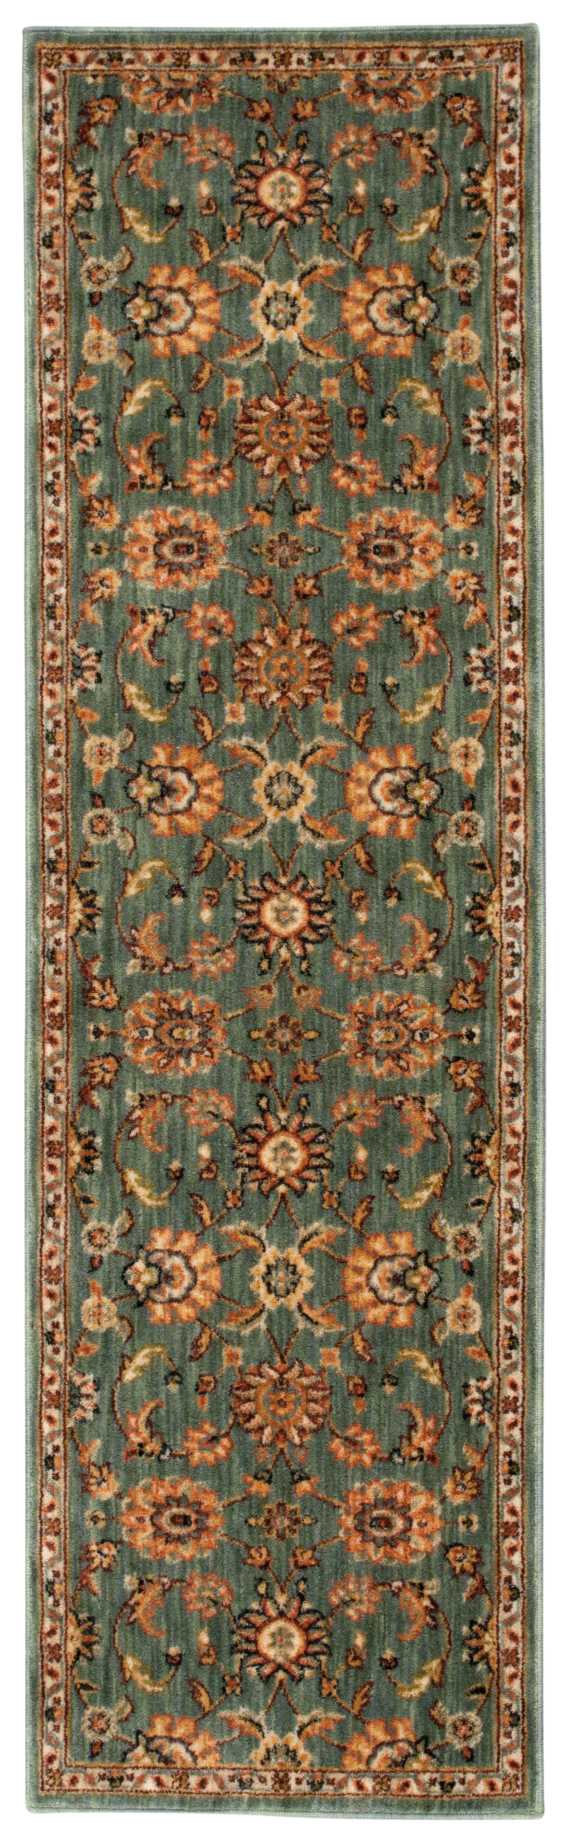 Kathy Ireland Ancient Times Ancient Treasures Teal Area Rug by Nourison